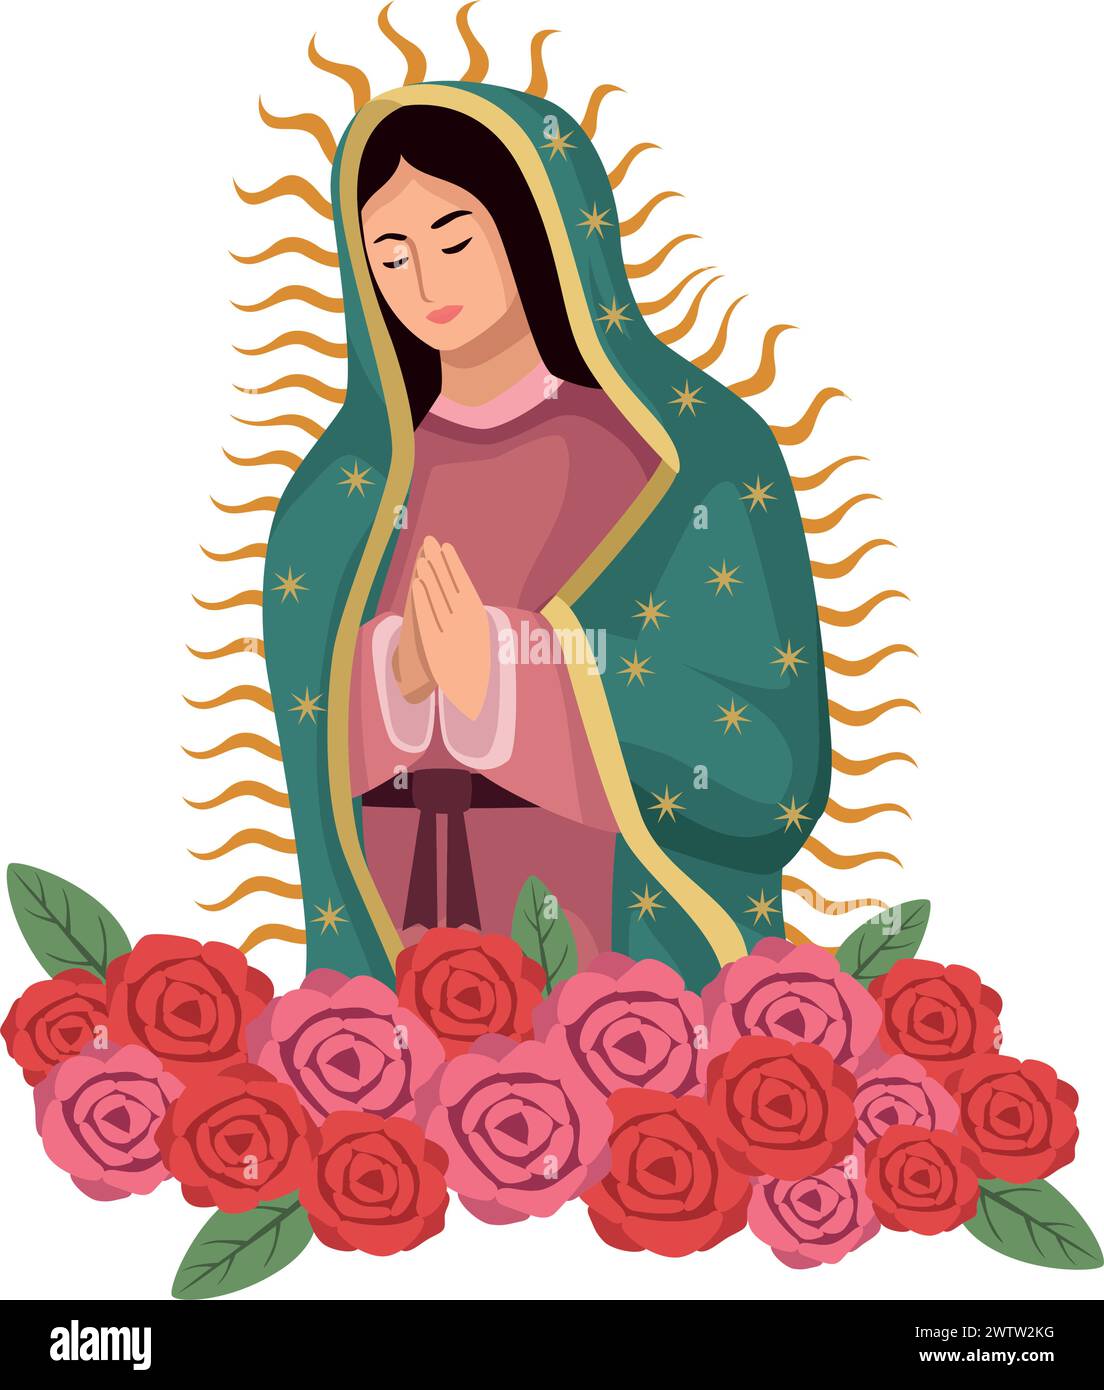 guadalupe virgin and flowers Stock Vector